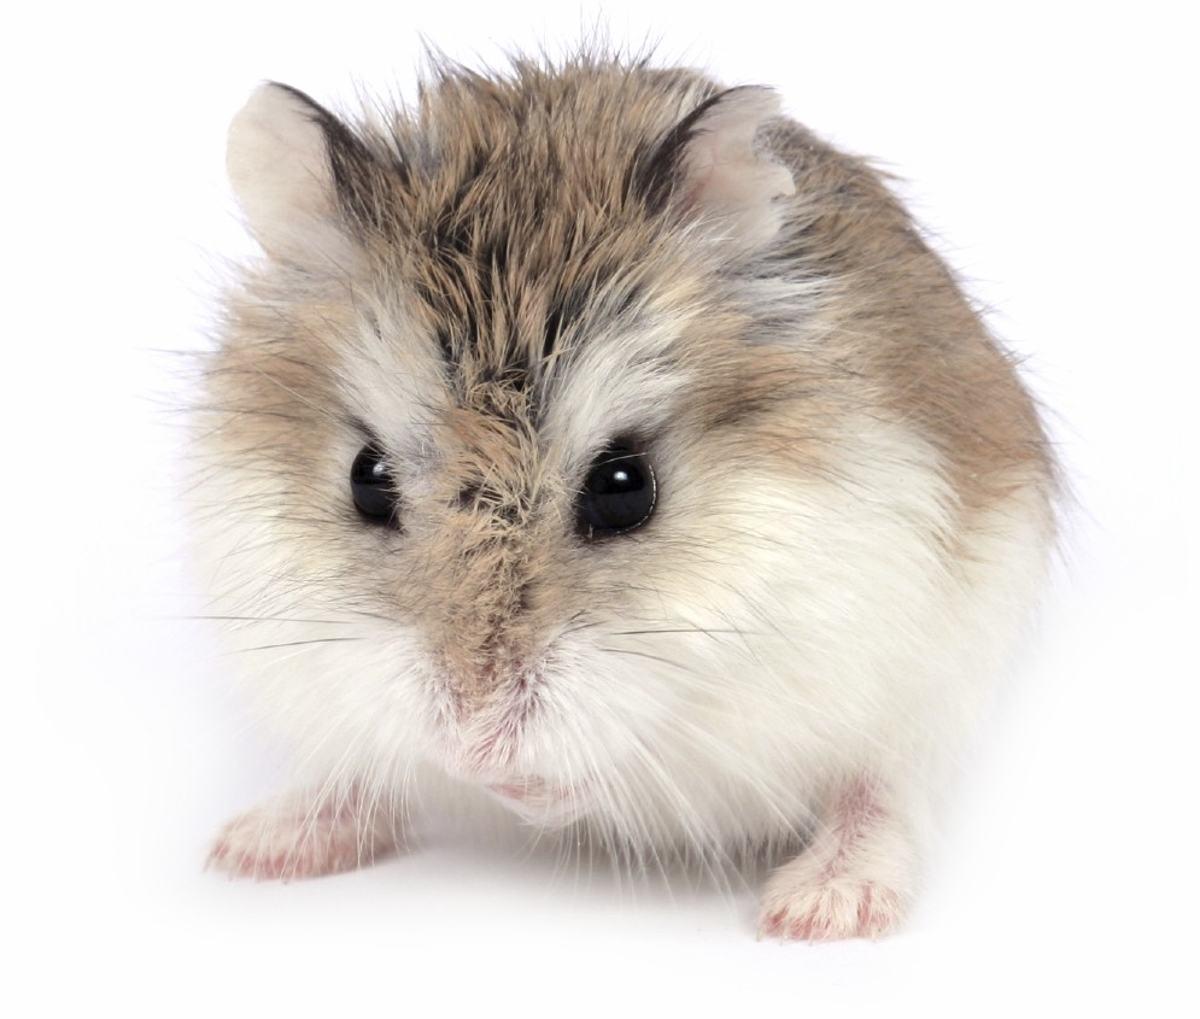 What You Should Know About the Cute Little Roborovski Hamsters